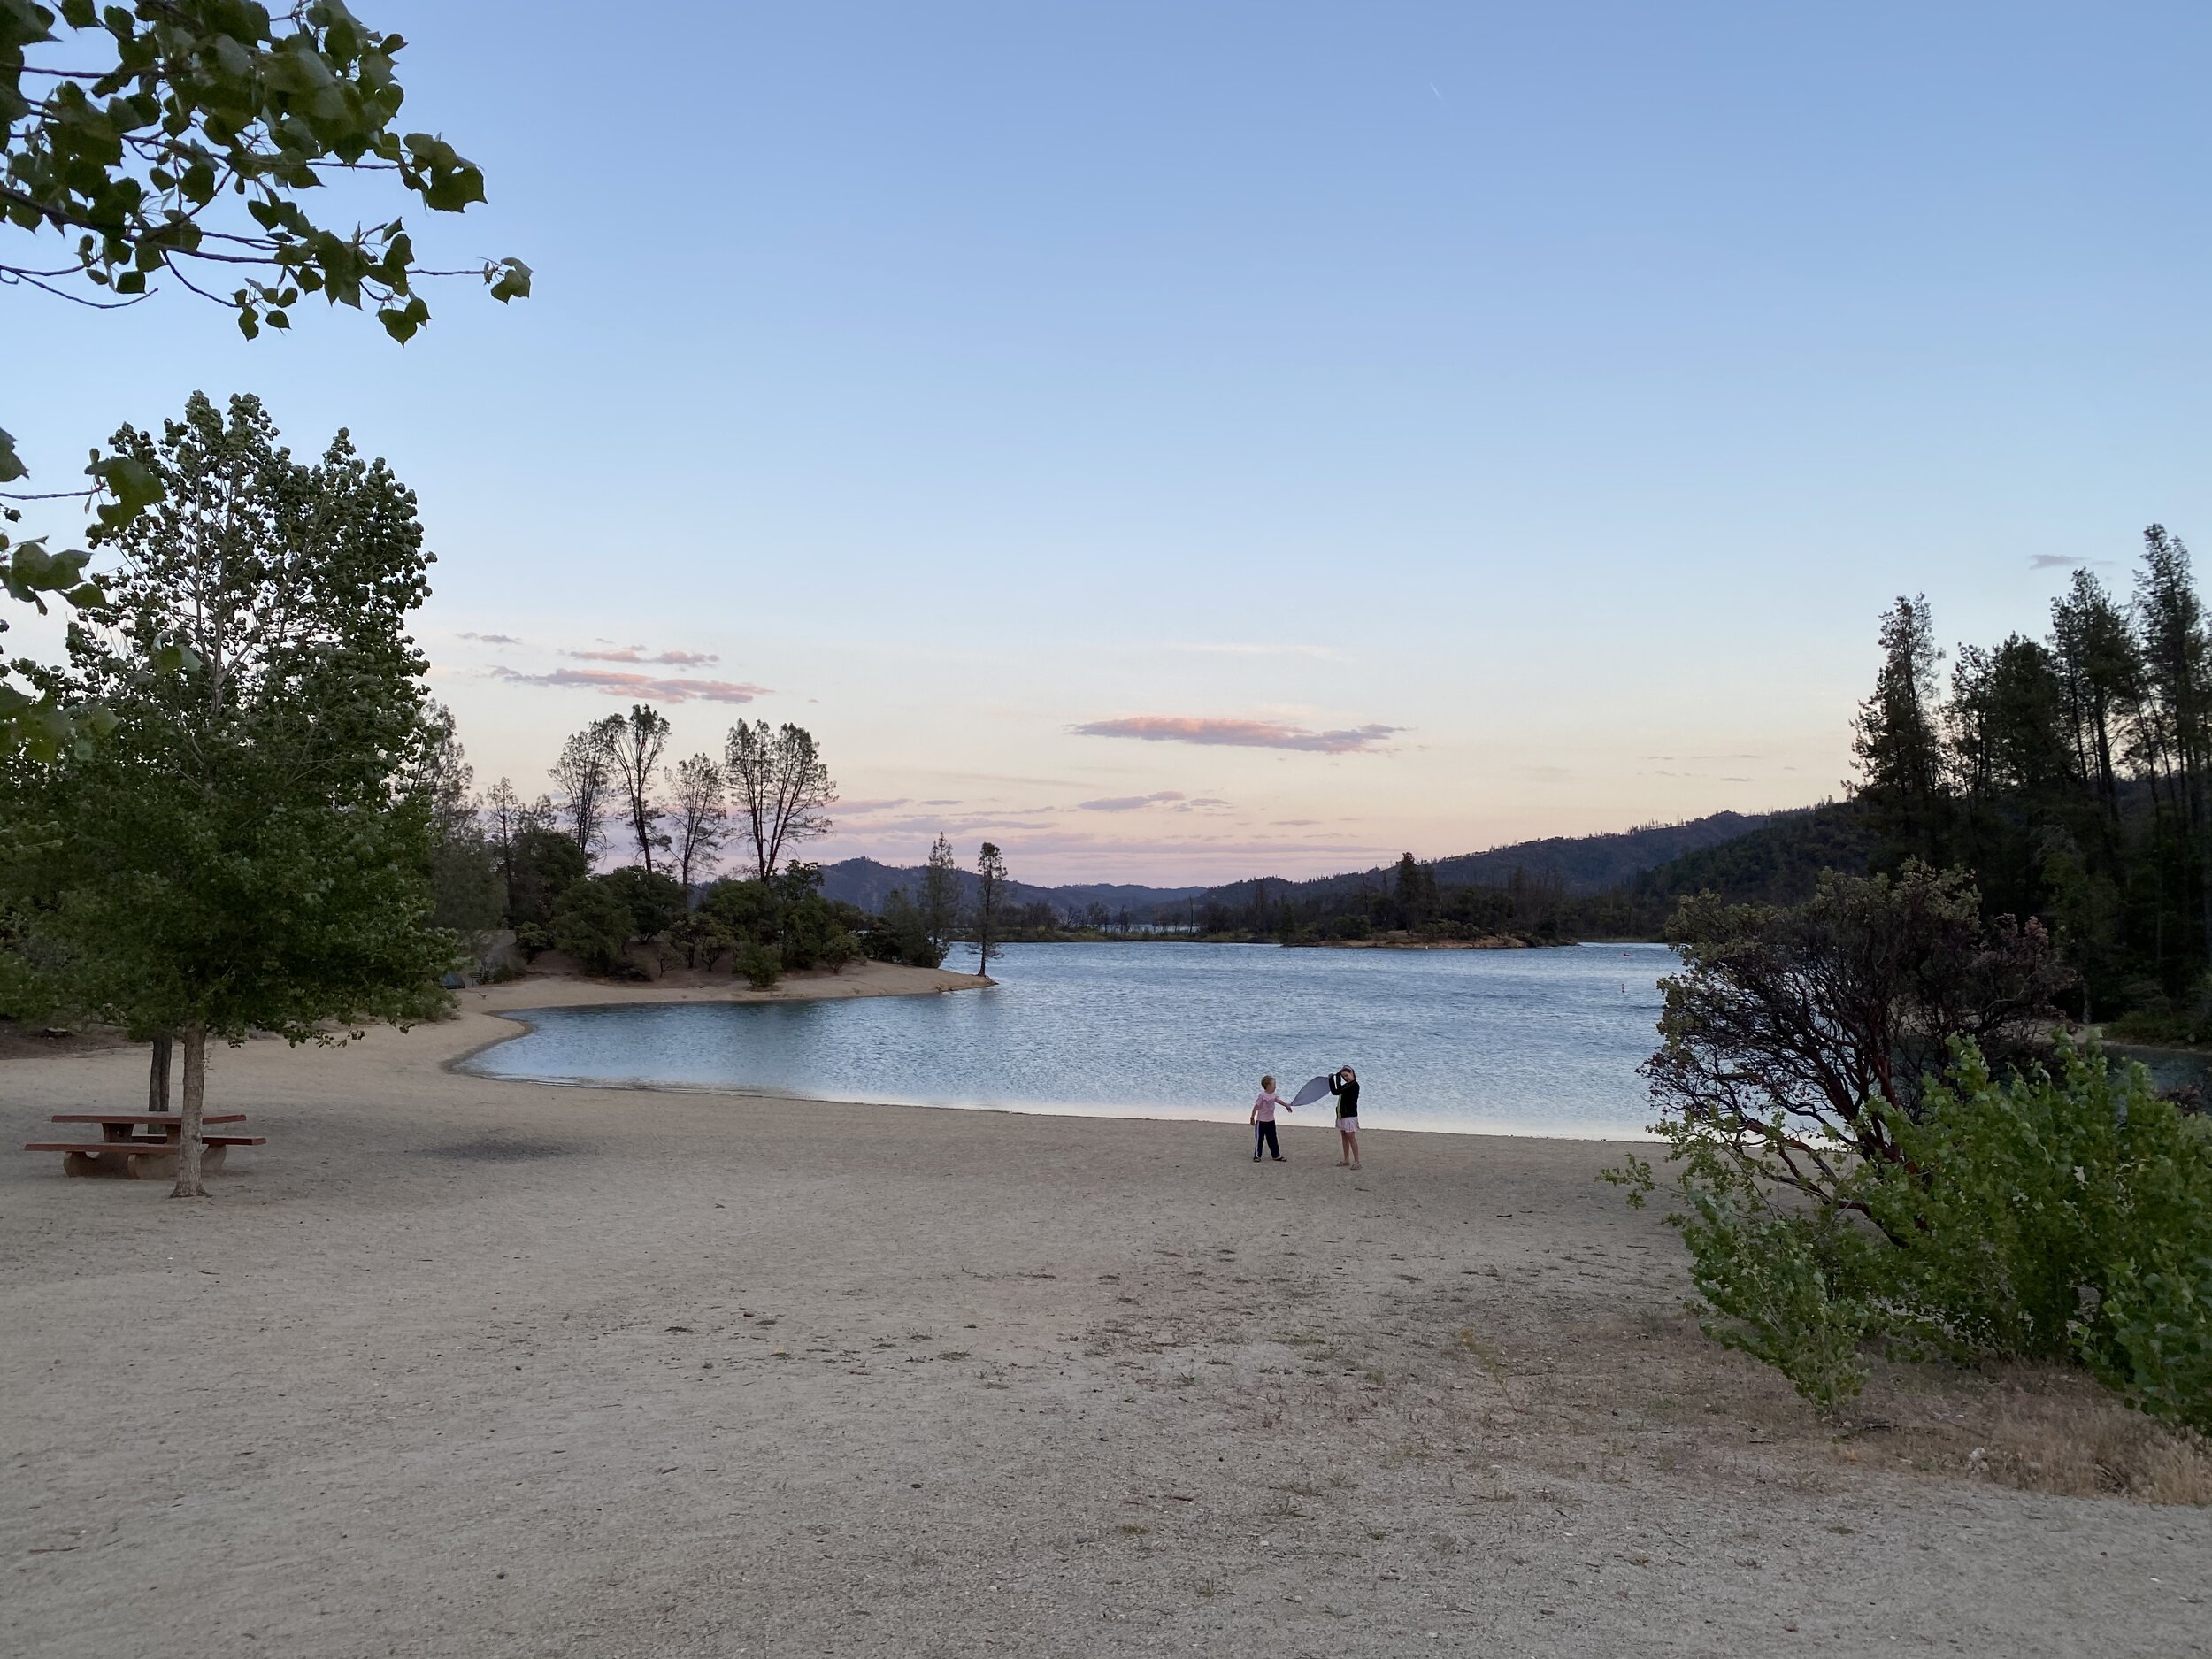 The kids play on a windy night at Oak Bottom Beach in Whiskeytown National Recreation Area near Redding, CA.  Photo by Karen Boudreaux, June 7, 2021